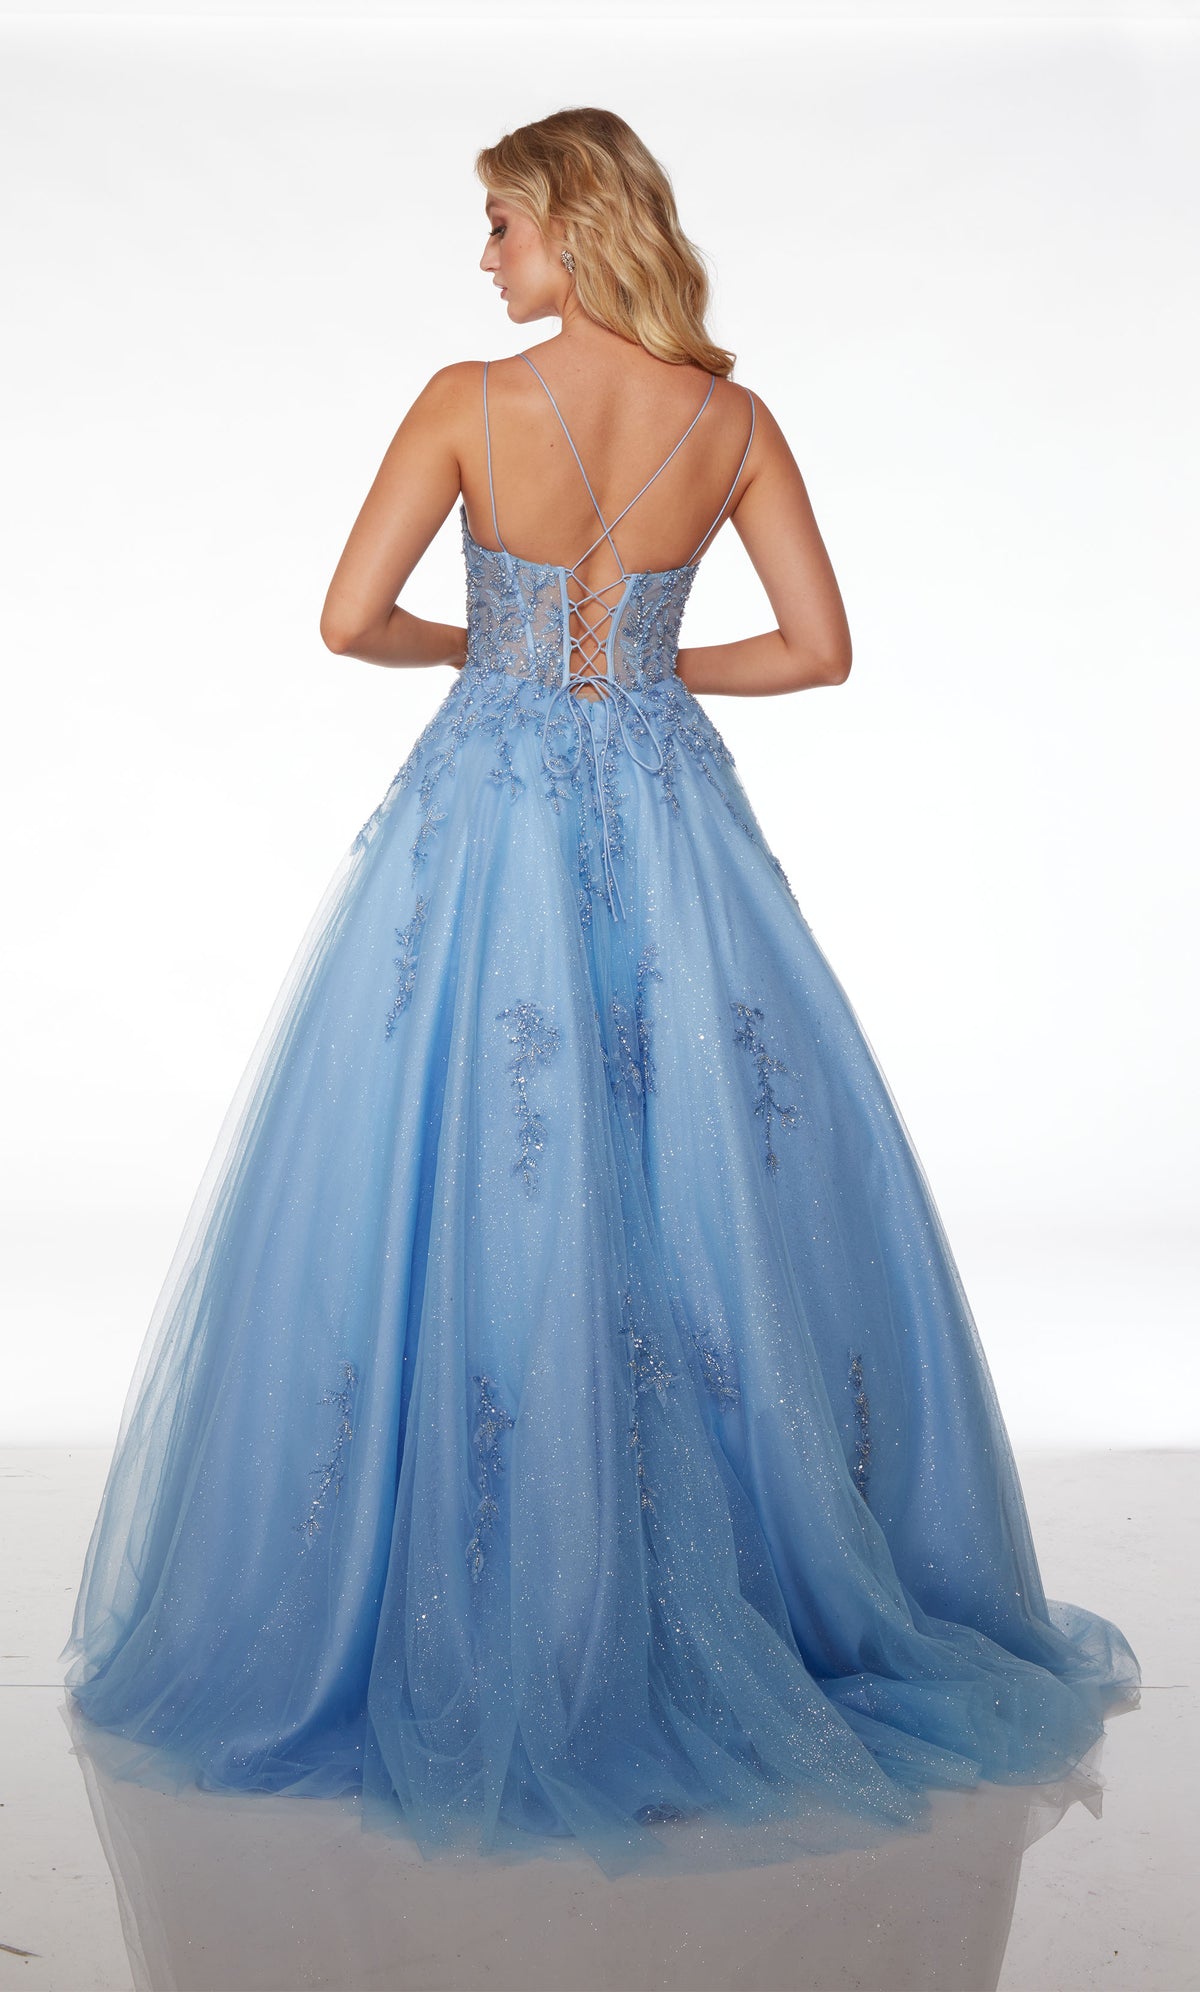 Cinderella-esque light blue glitter tulle ball gown: V neckline, sheer corset bodice, dual spaghetti straps, lace-up back, and beaded floral lace appliques.